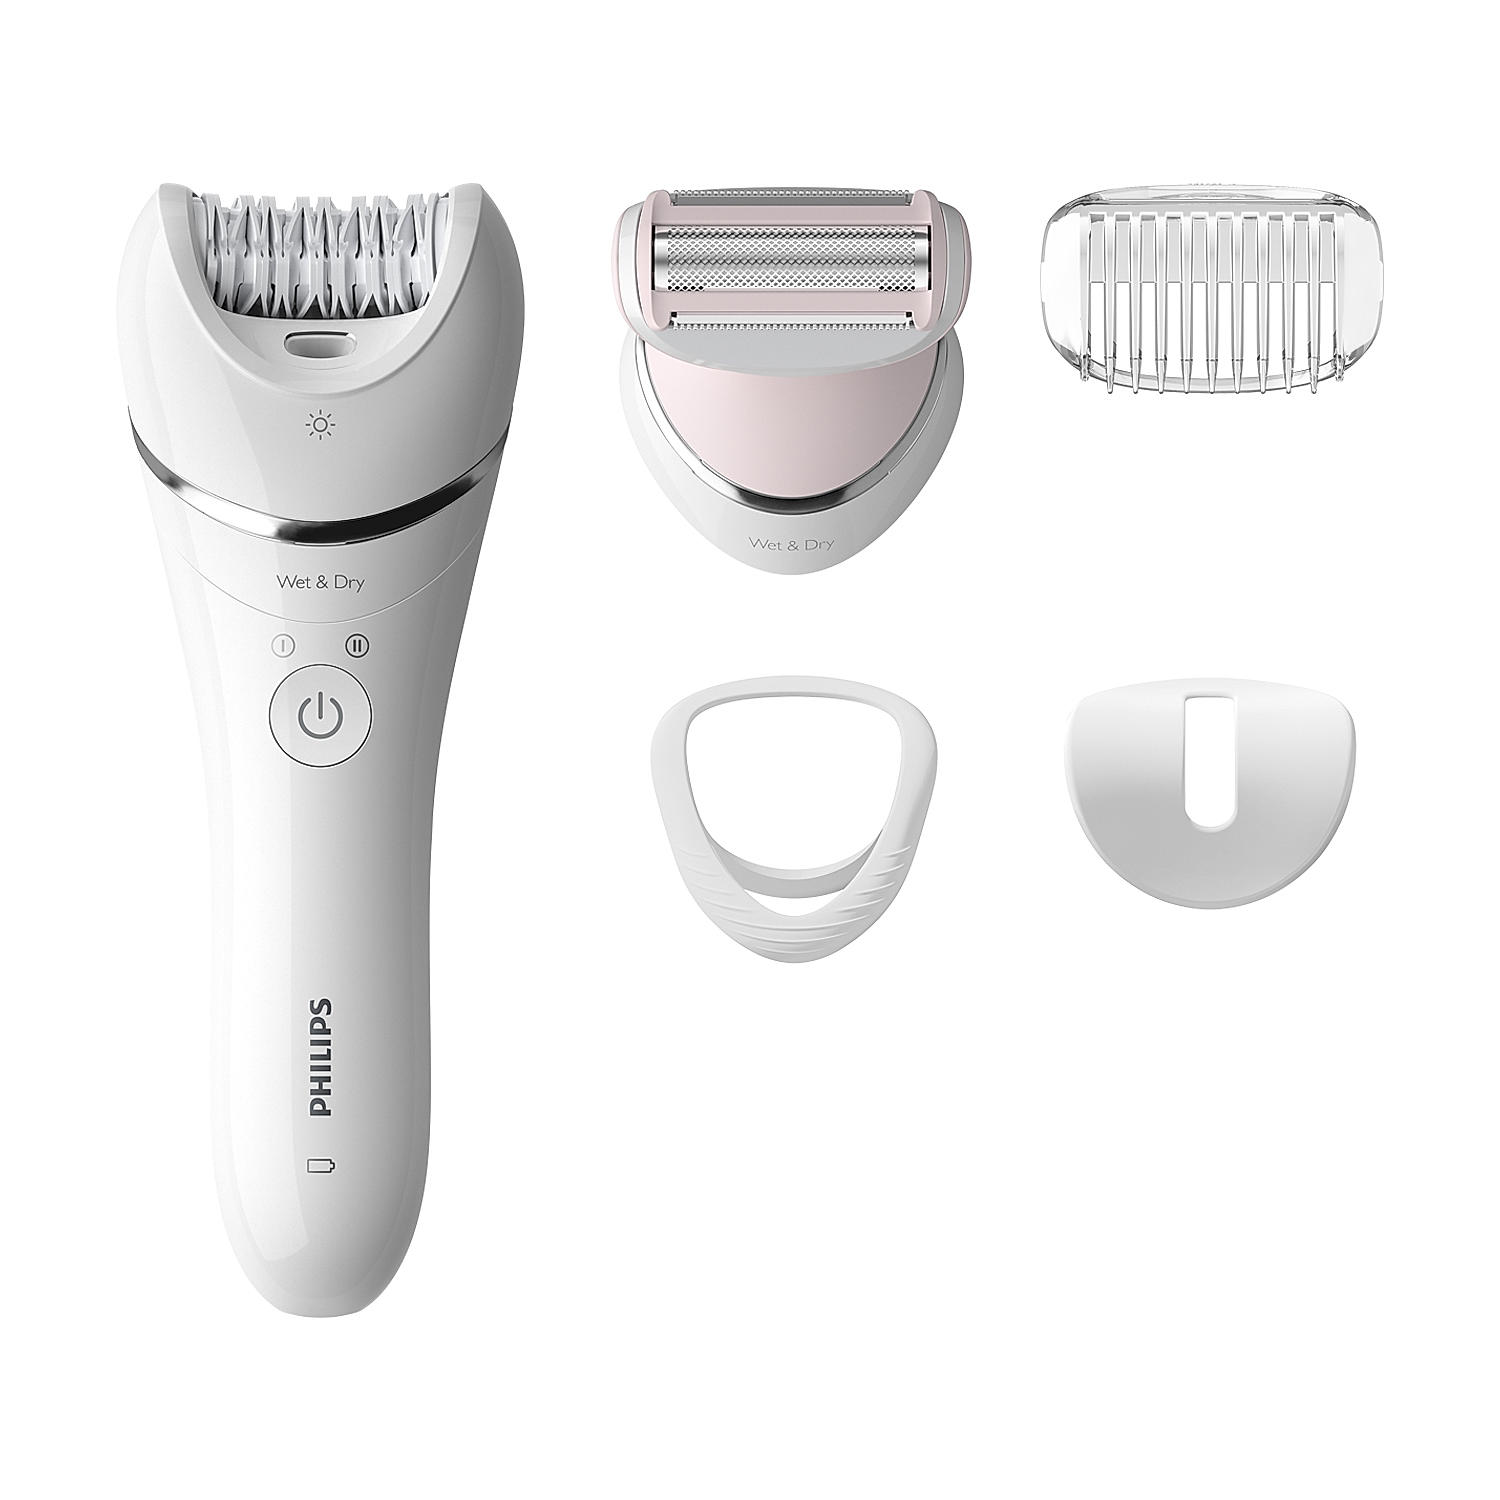 Philips Norelco Steps Into Gender-Inclusive Grooming with OneBlade Intimate